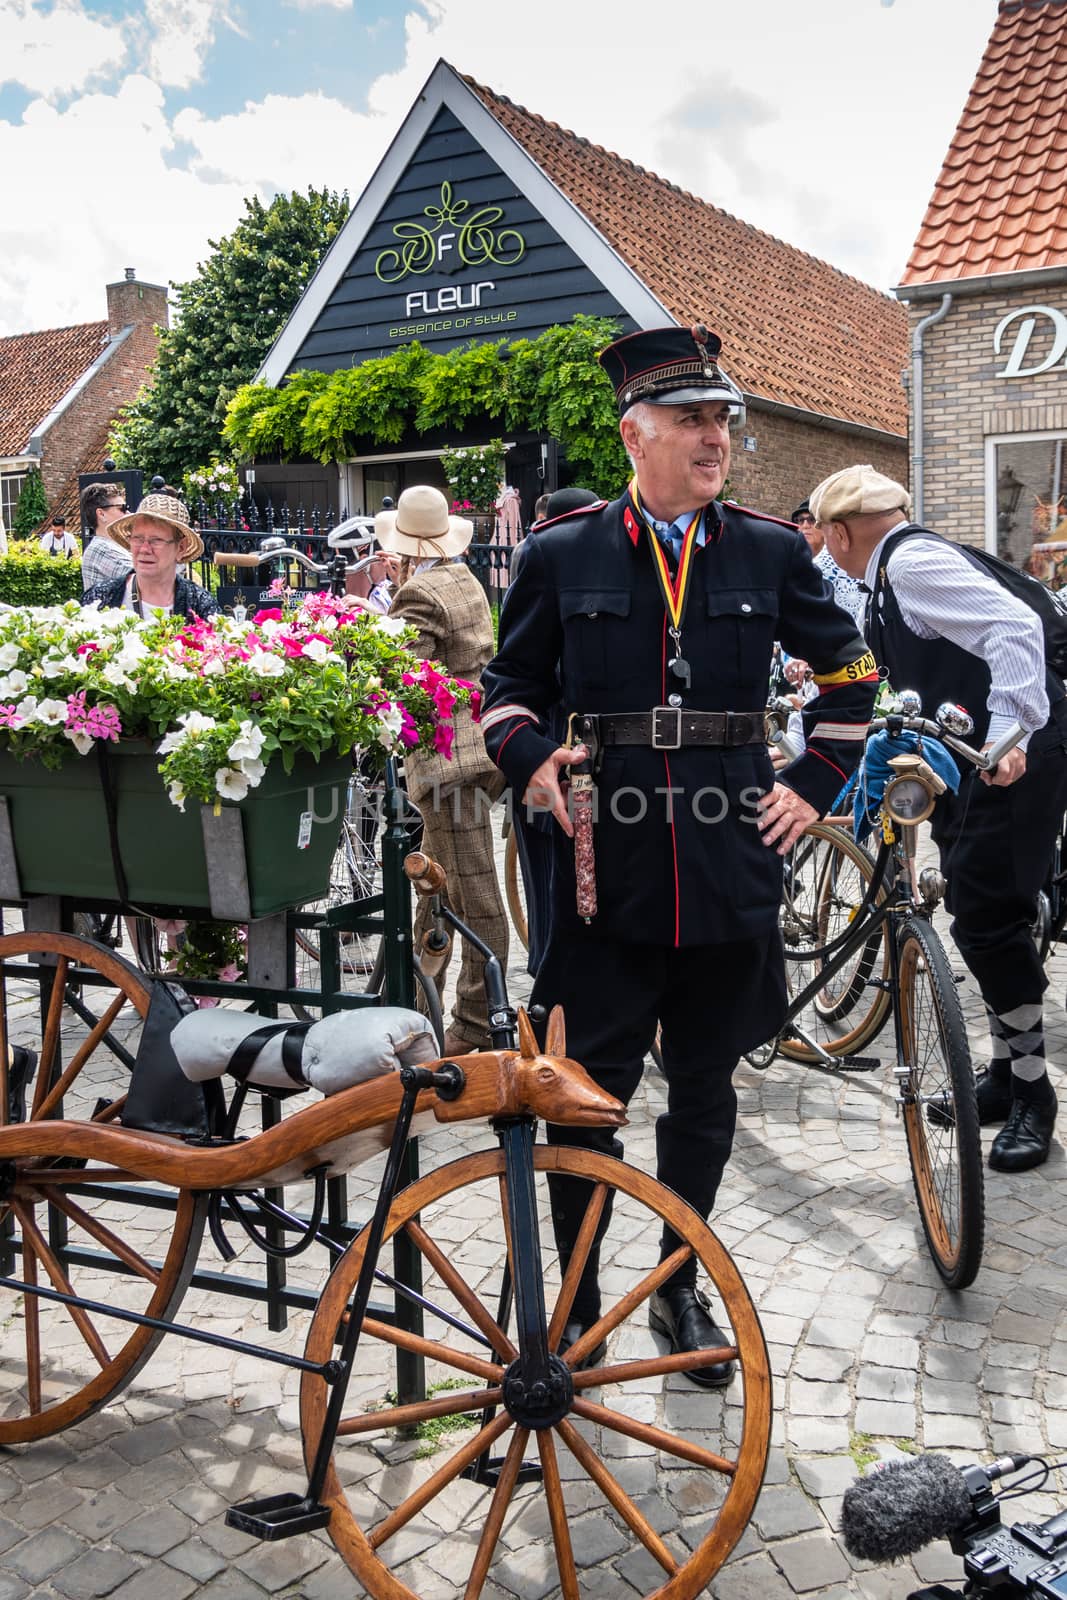 Sluis, the Netherlands -  June 16, 2019: Man dressed up as Belgian Gendarme of a century ago, with historic wooden bike and a saucisse as weapon. Other people and facades in back.